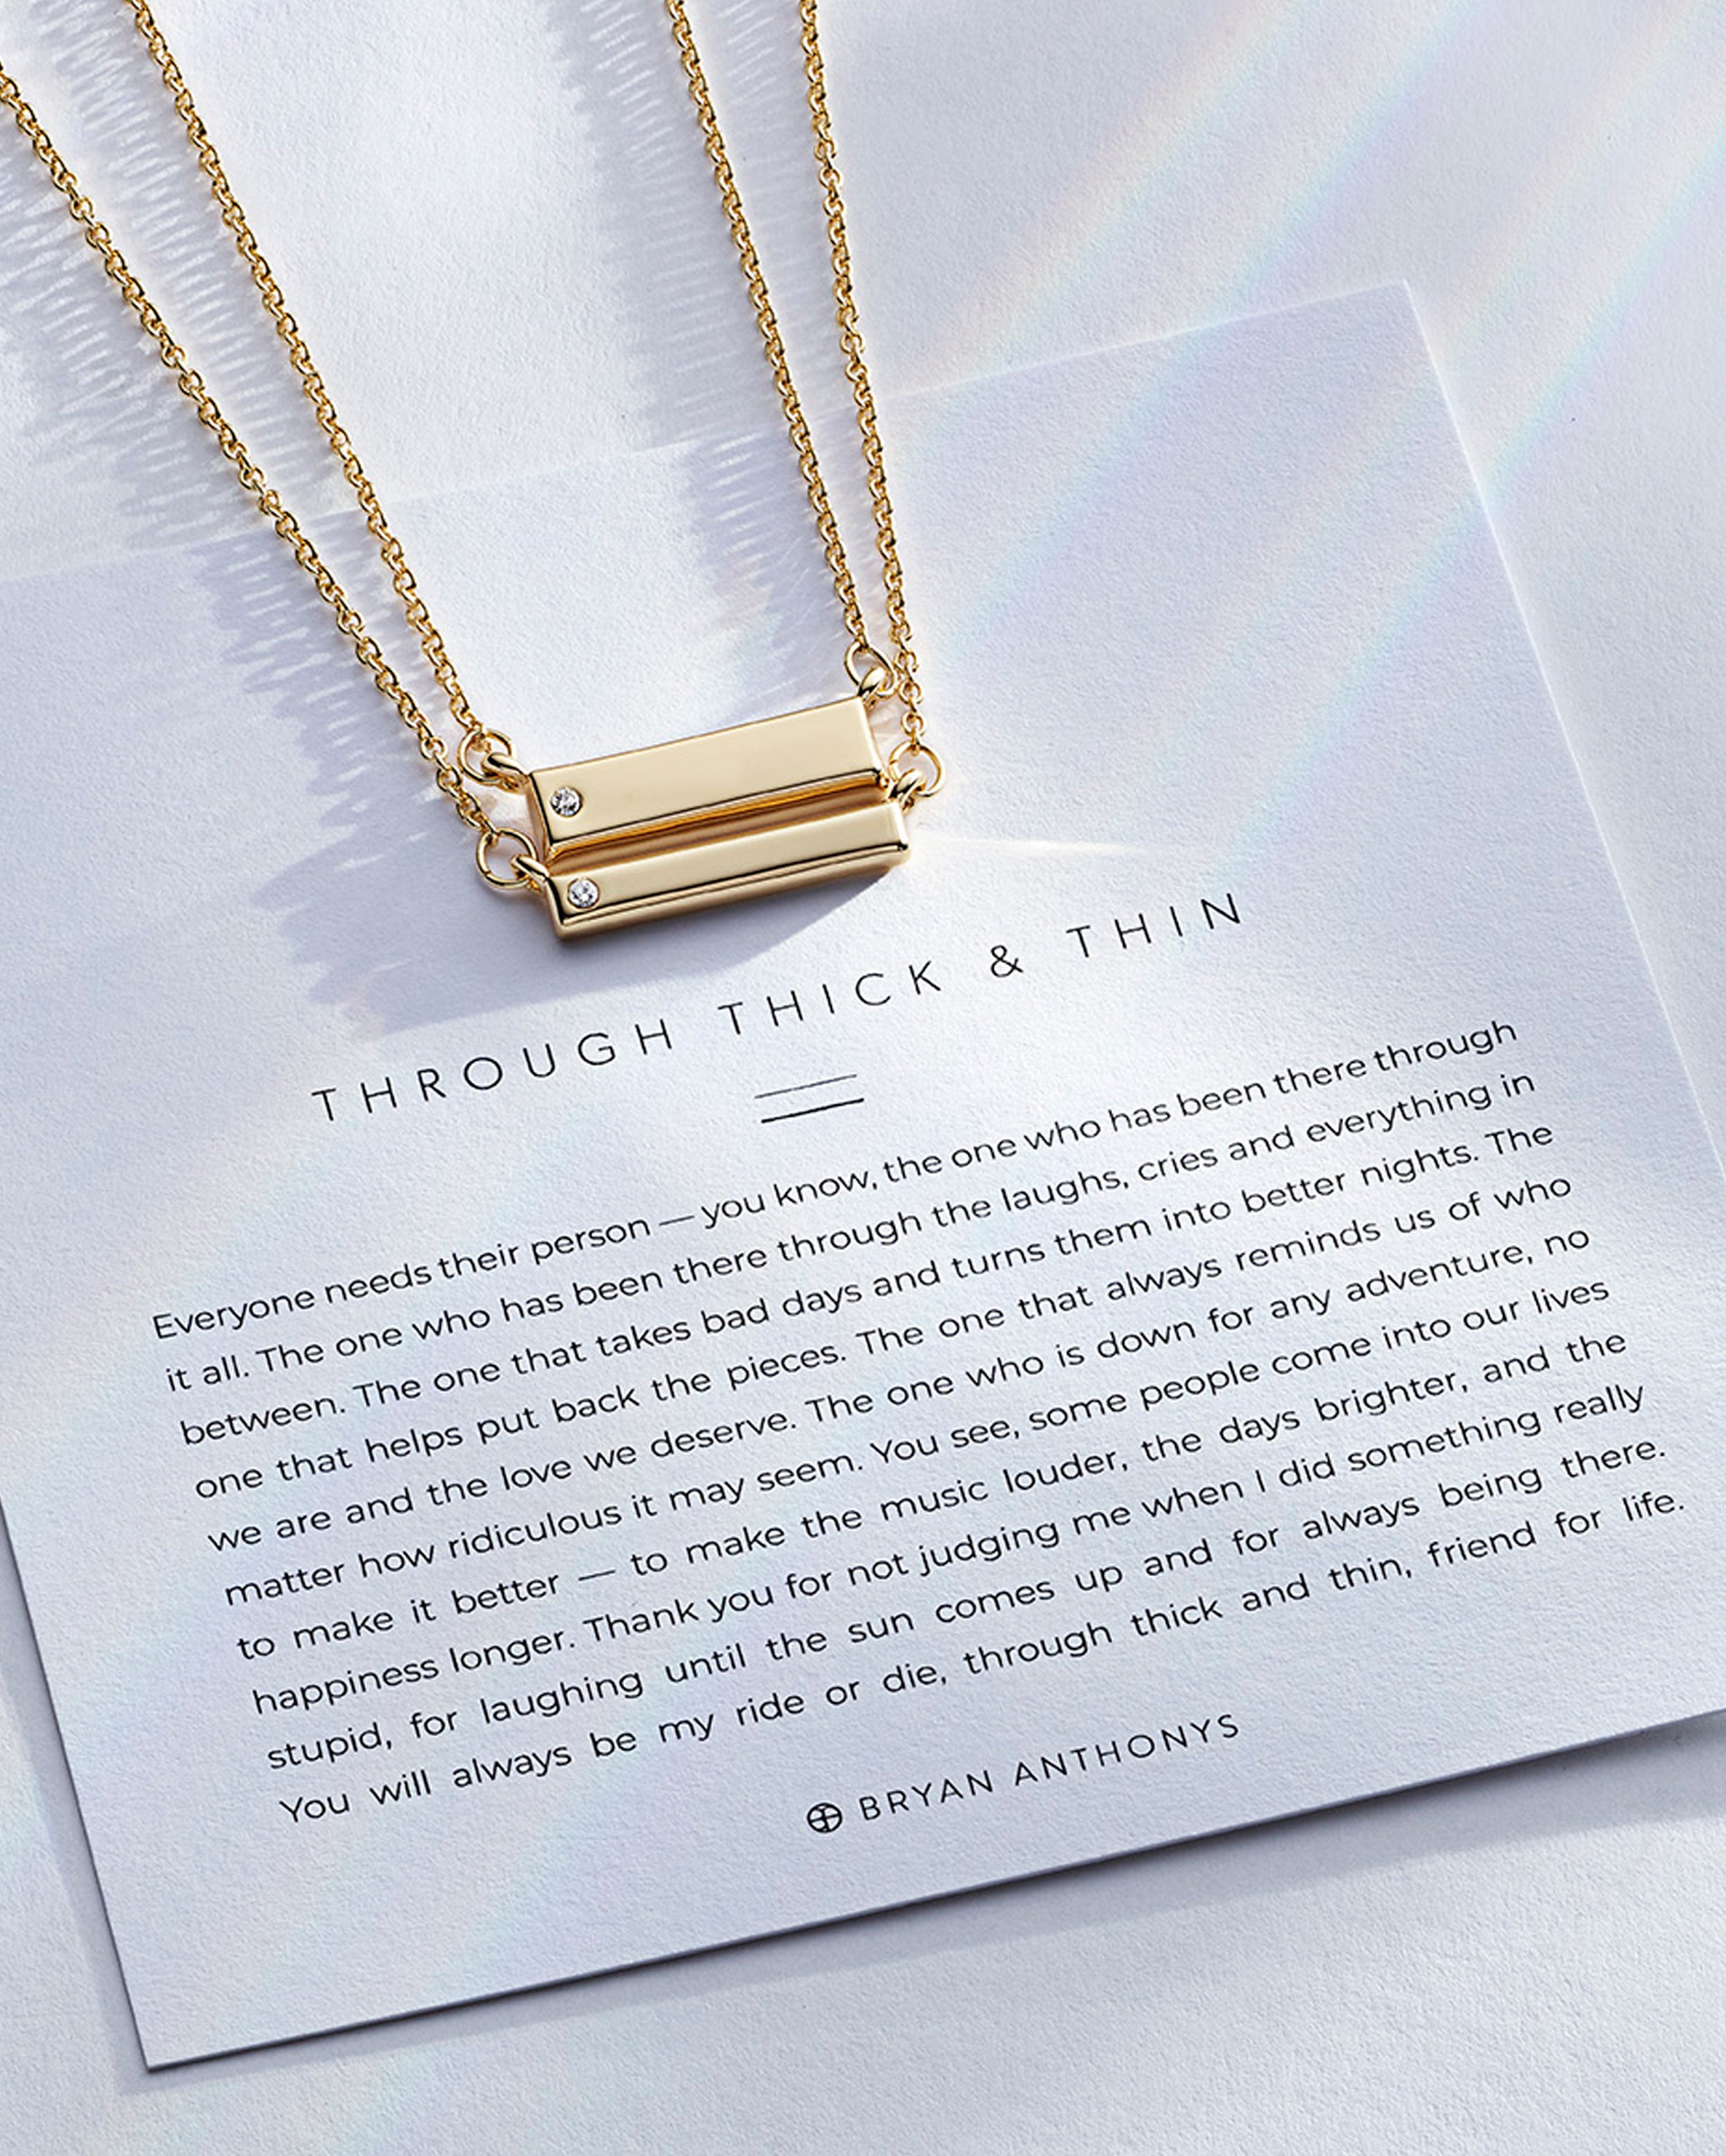 Bryan Anthonys Through Thick and Thin Necklace Set Gold with Meaning Card